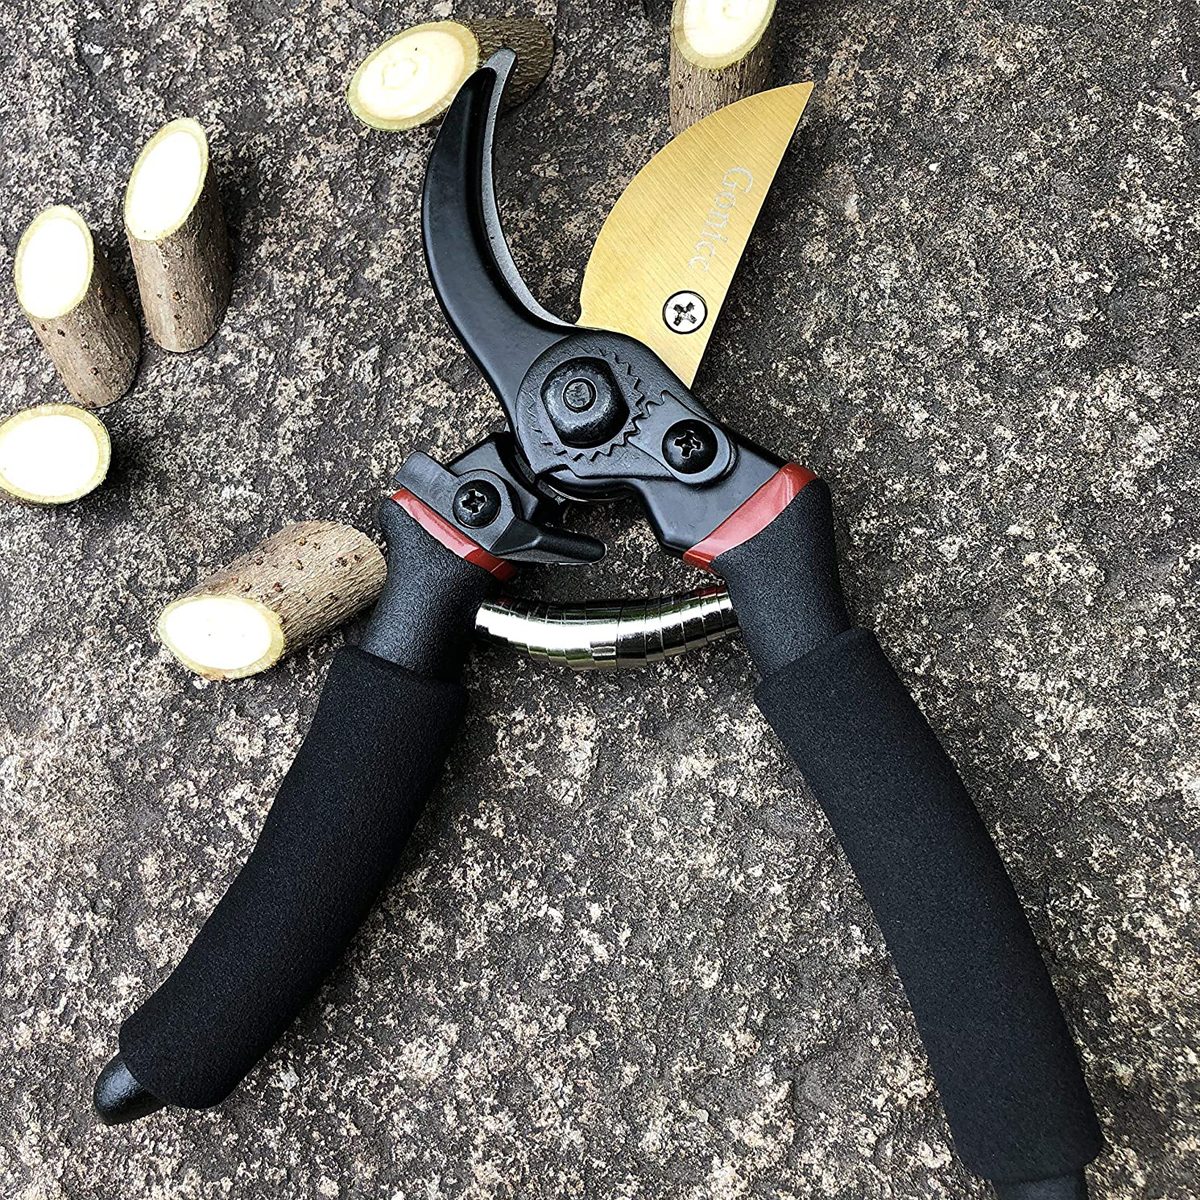 The Only Pair Of Garden Pruners You'll Ever Need